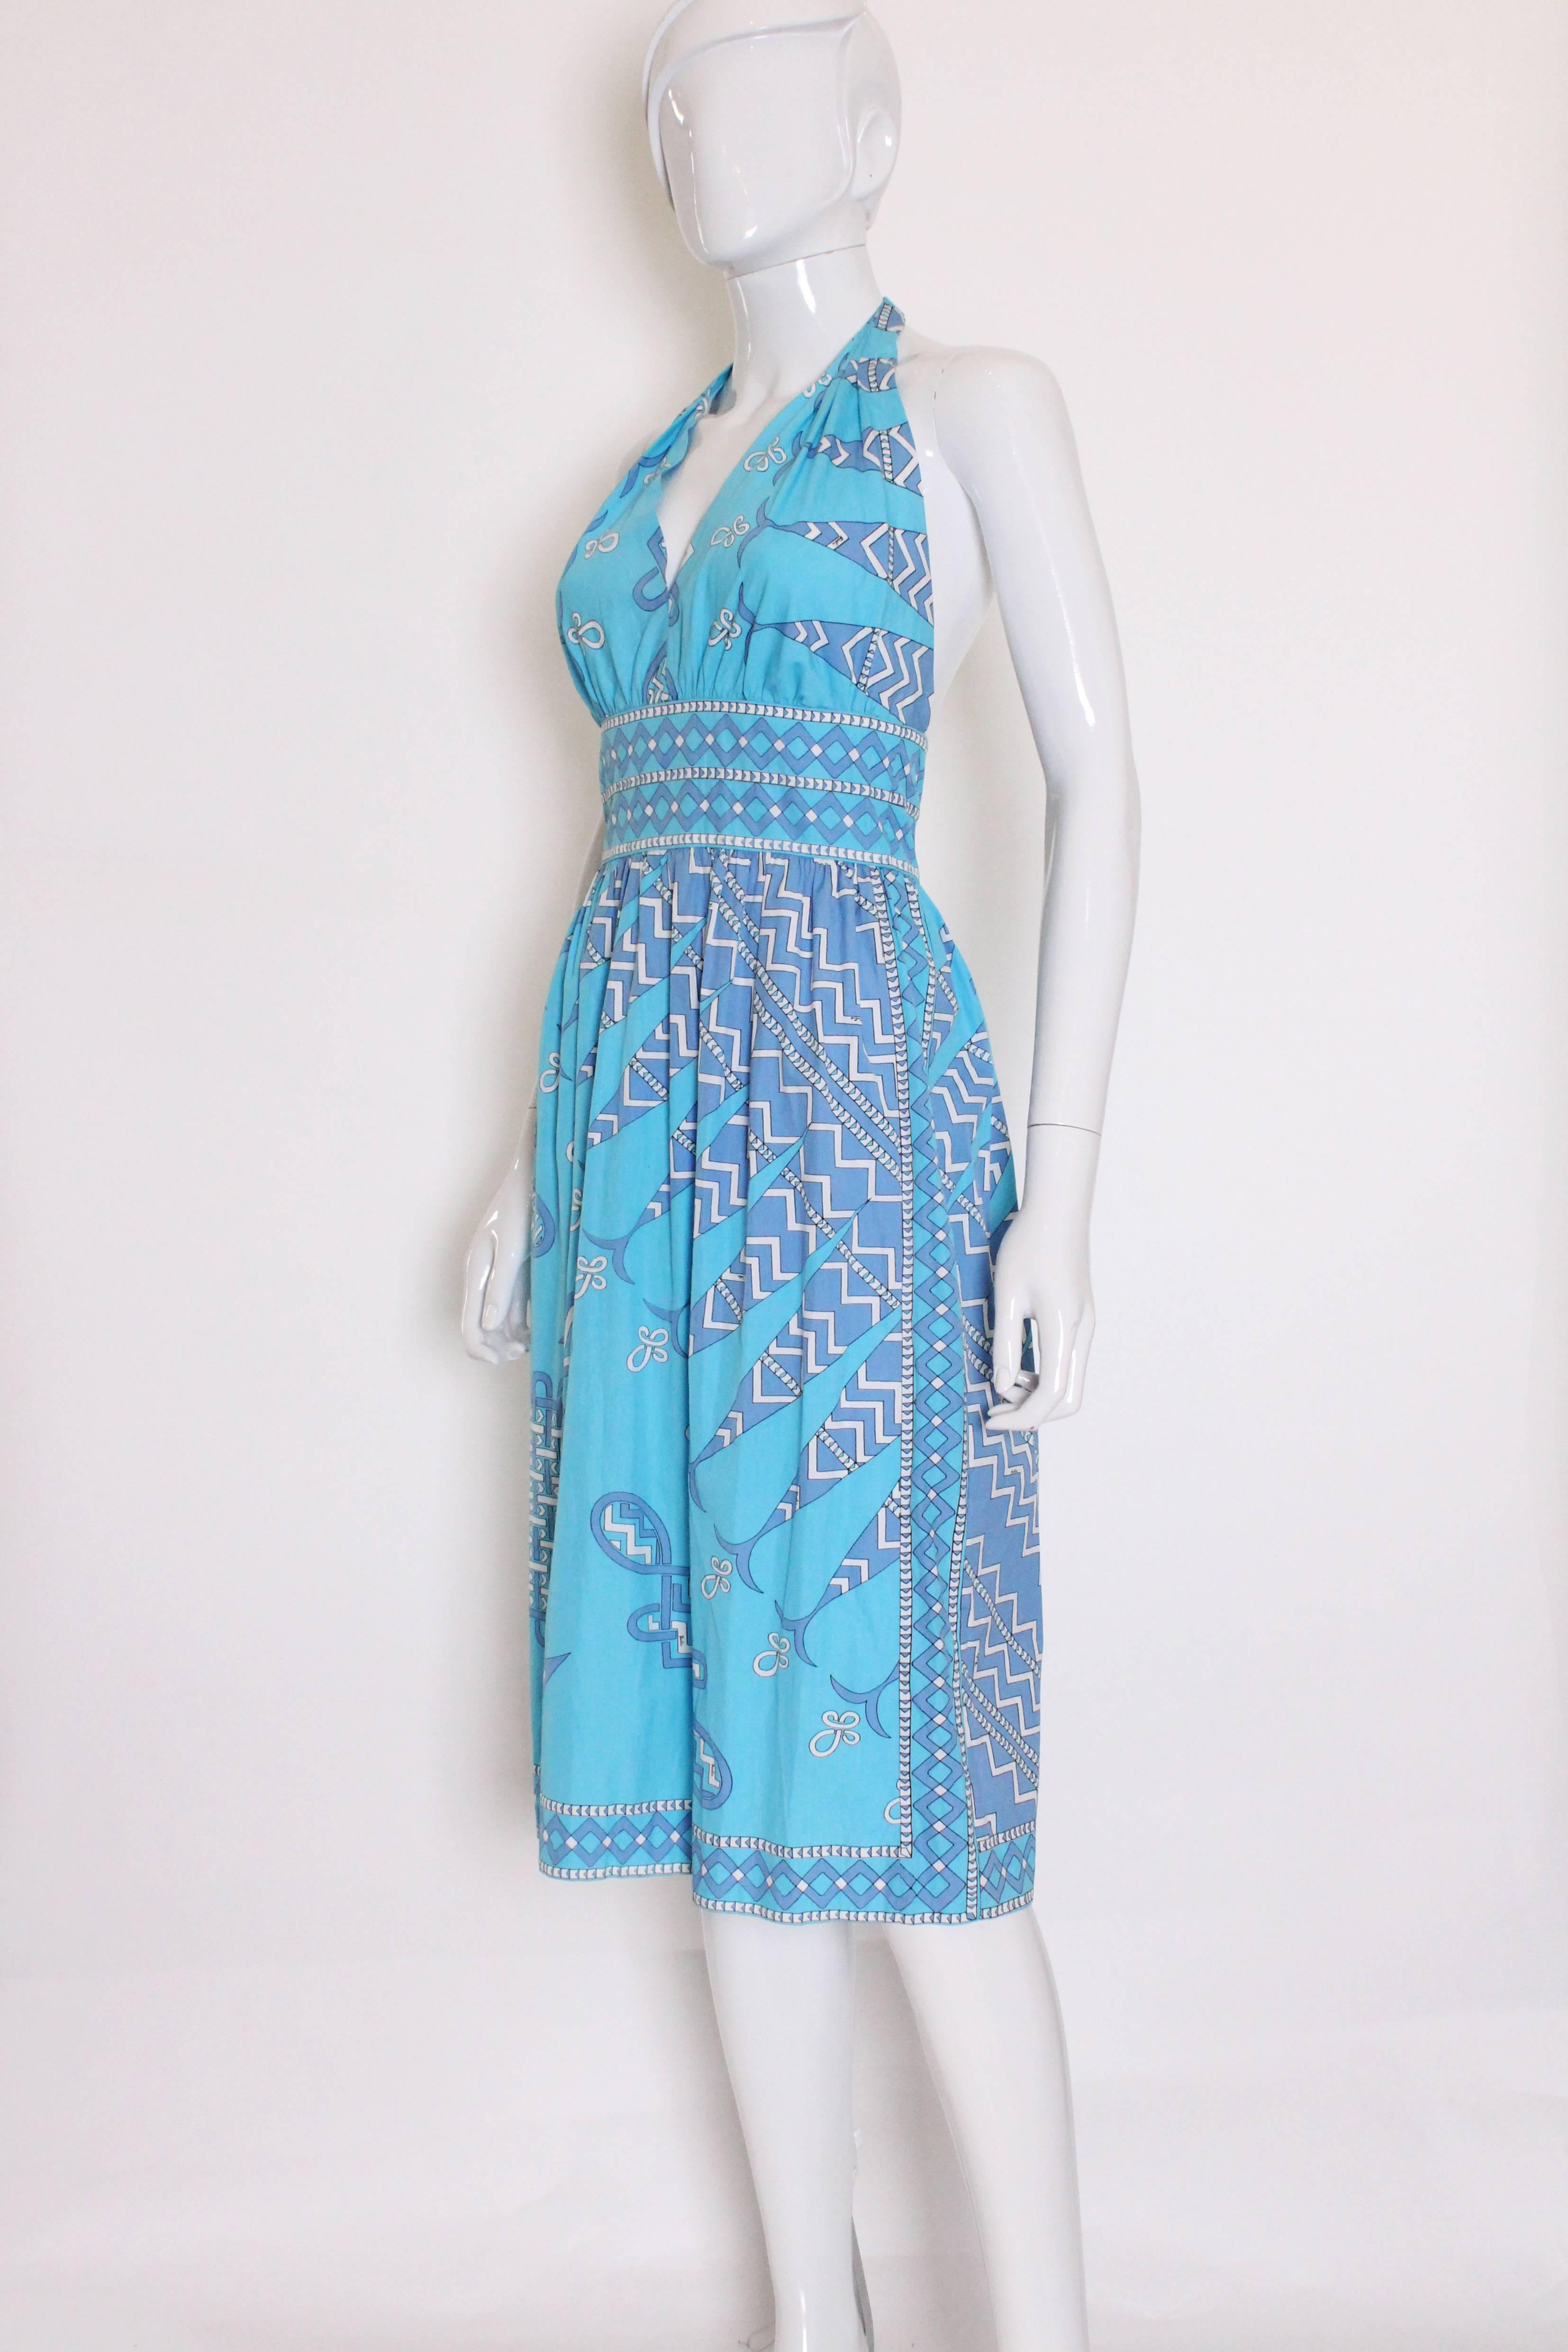 A great dress for summer, this cotton halterneck by Emilio Pucci will turn heads.
The dress was made in Italy by Pucci for the Emilio Pucci Boutique in Saks Fifth Avenue.The background is sky blue and the design is in shades of lilac/blue , black